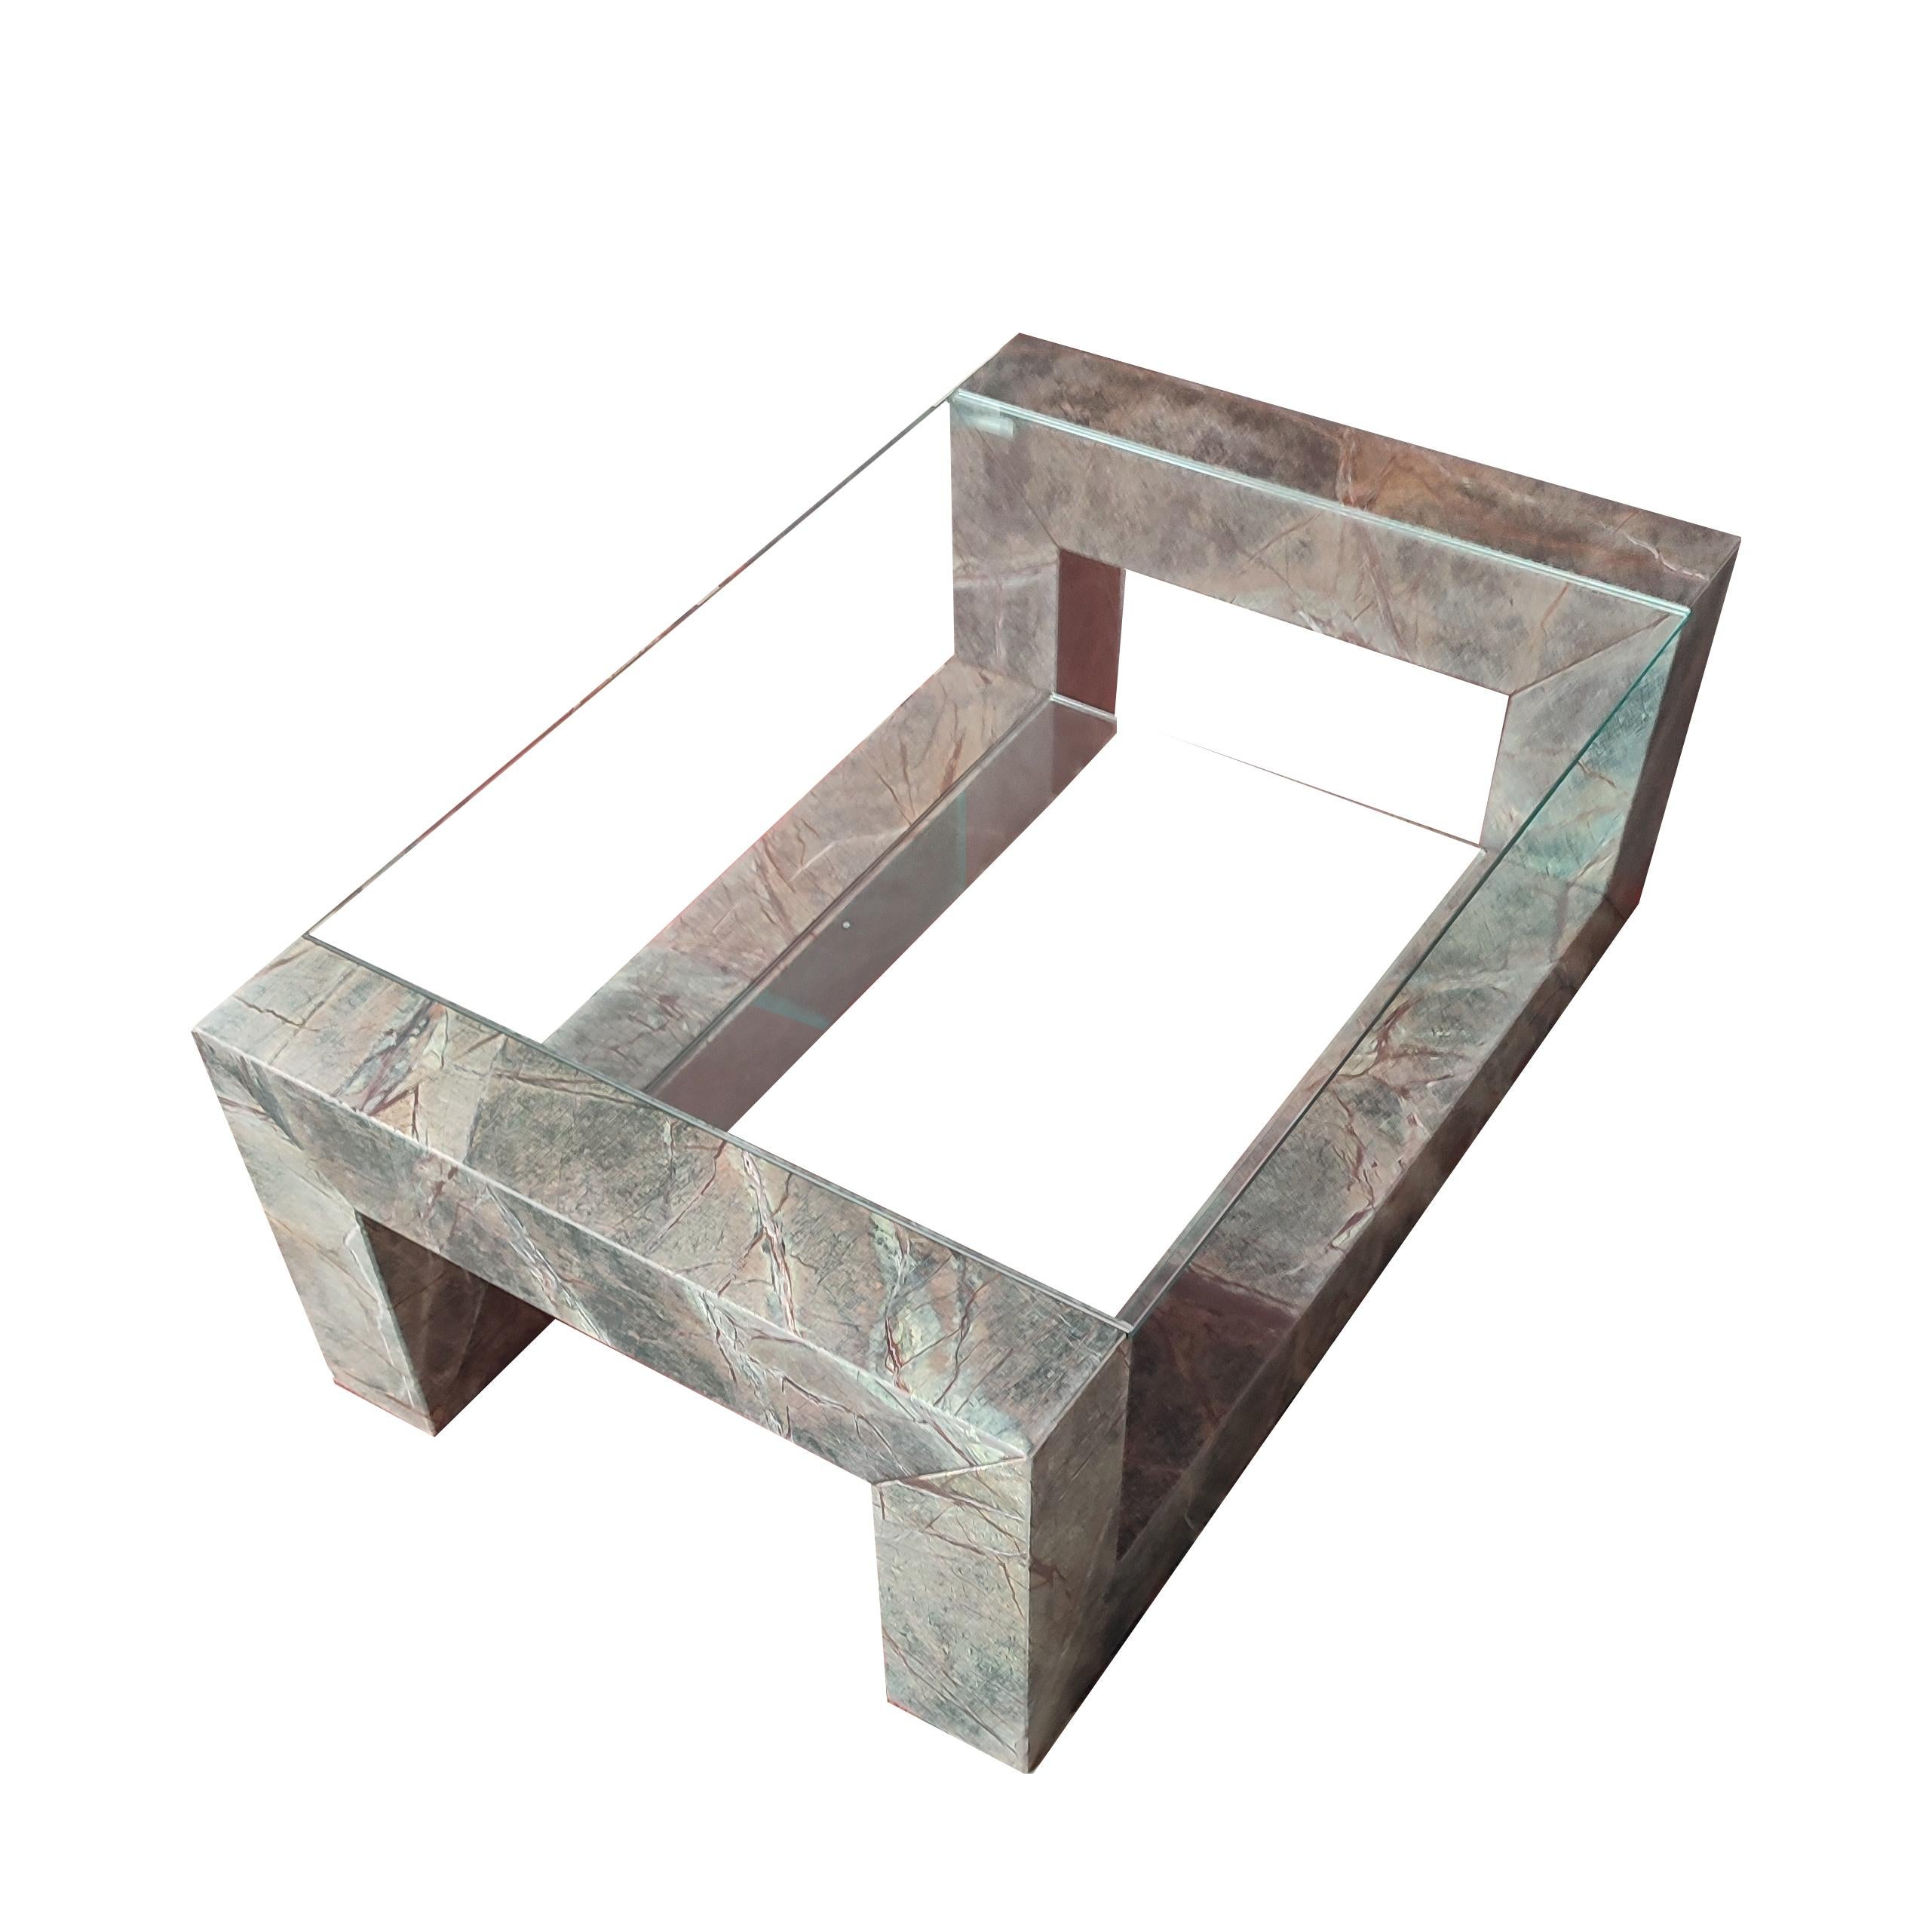 Hand-Crafted Devon Green Marble Coffee Table Contemporary Design Spain by Joaquín Moll Meddel For Sale